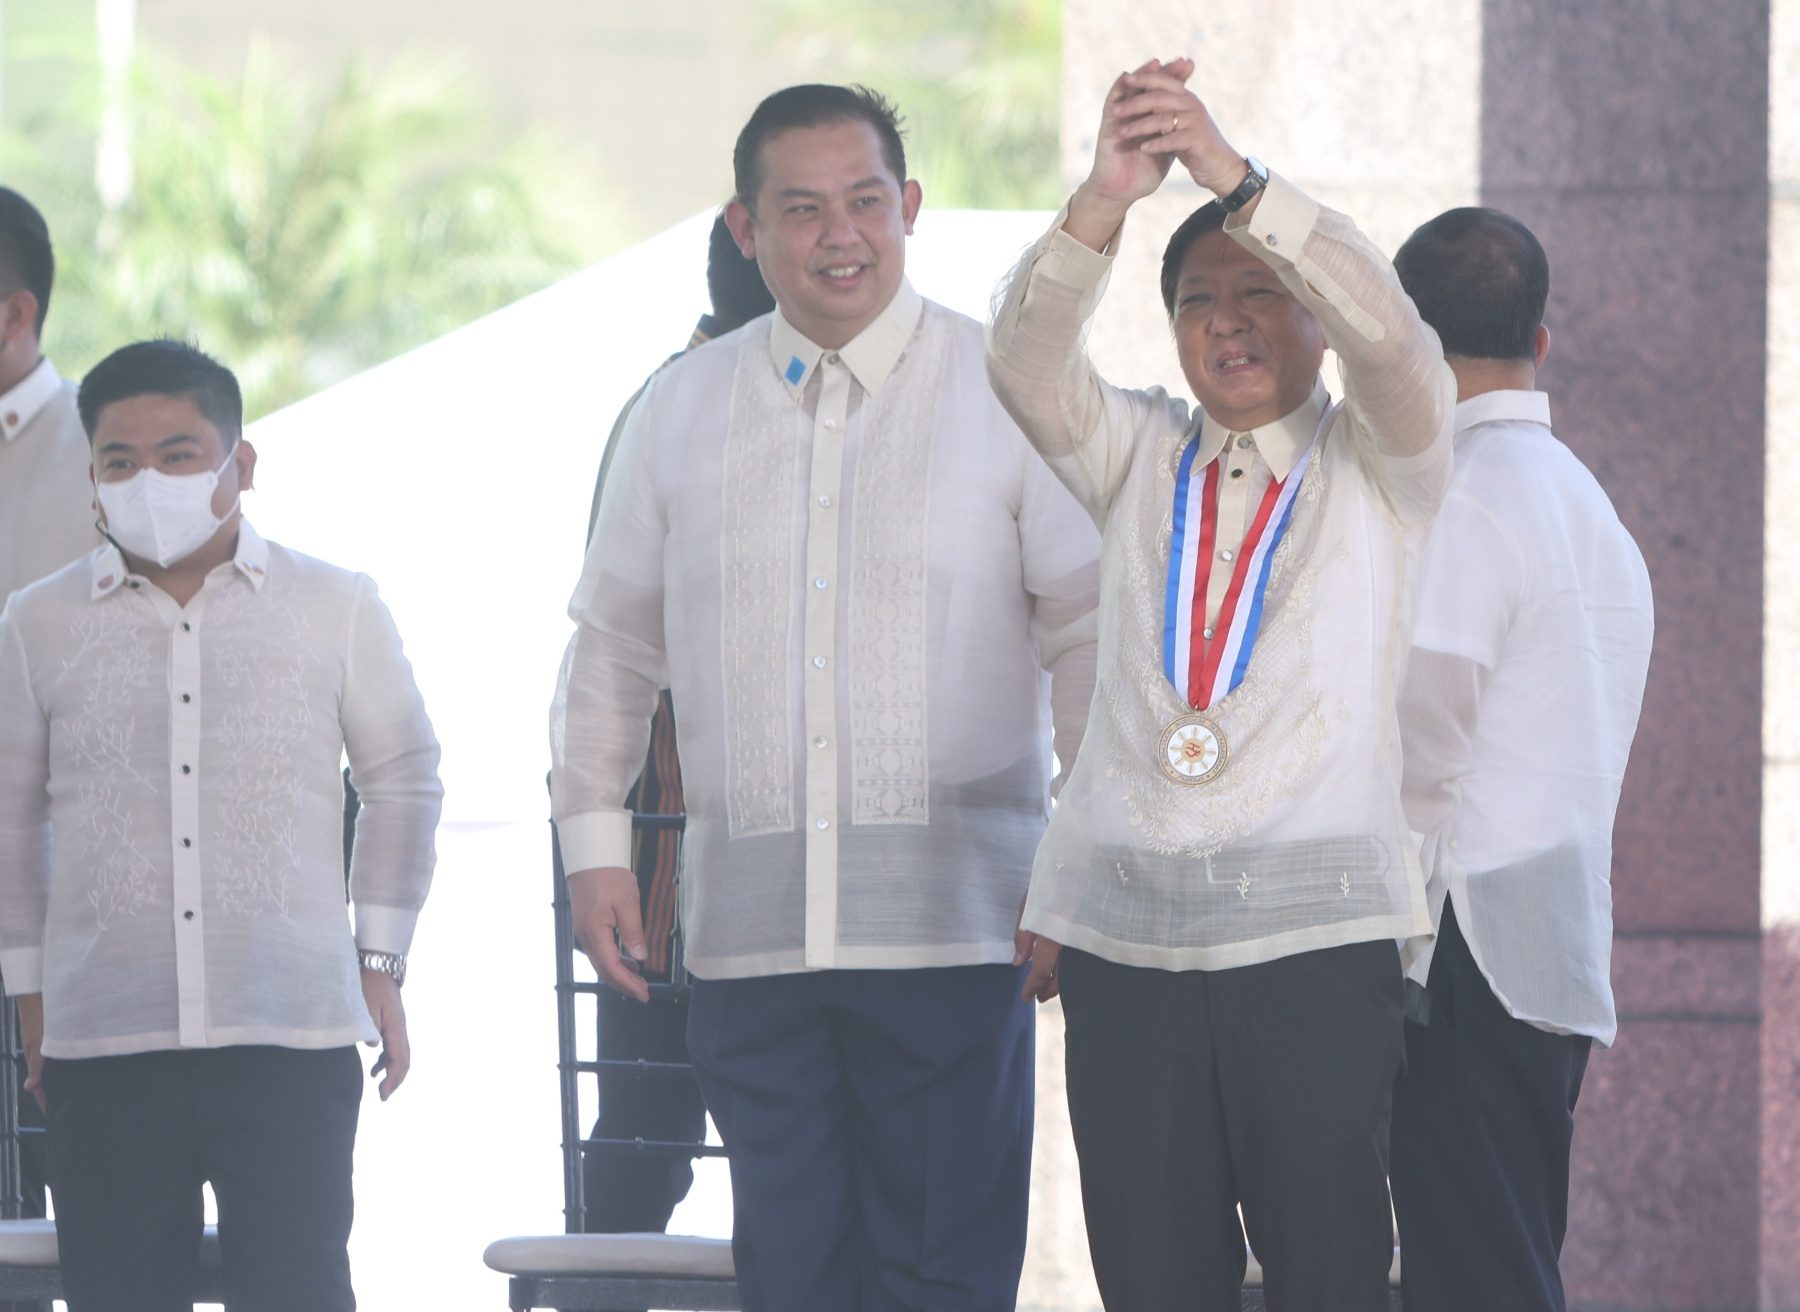 President Marcos hasn’t talked about the Maharlika fund proposal himself